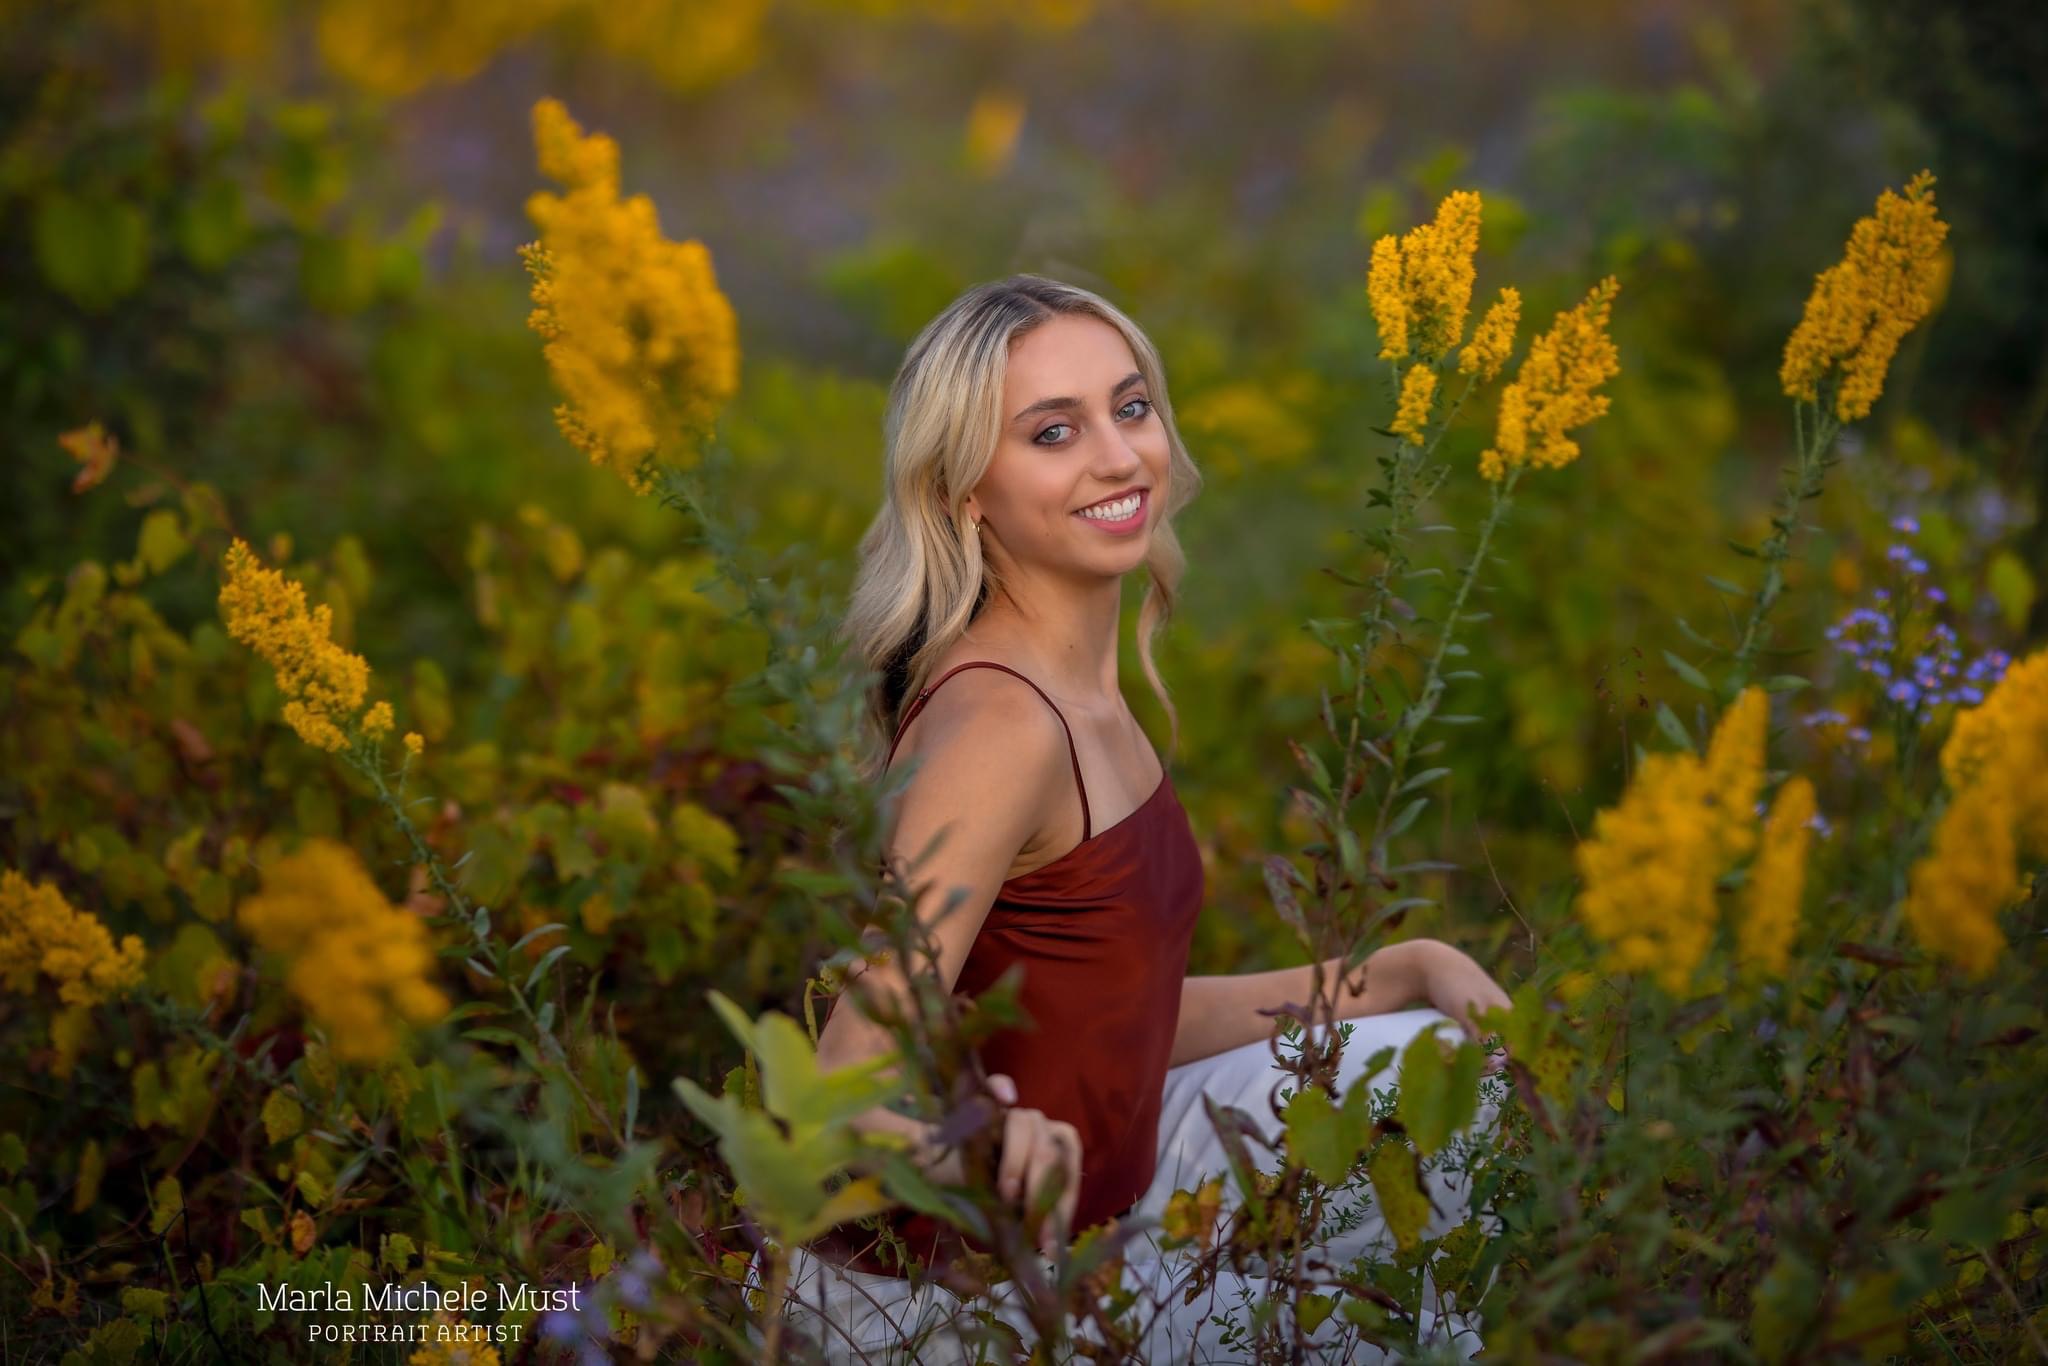 A high school senior poses for her senior photoshoot while sitting among a field of yellow flowers